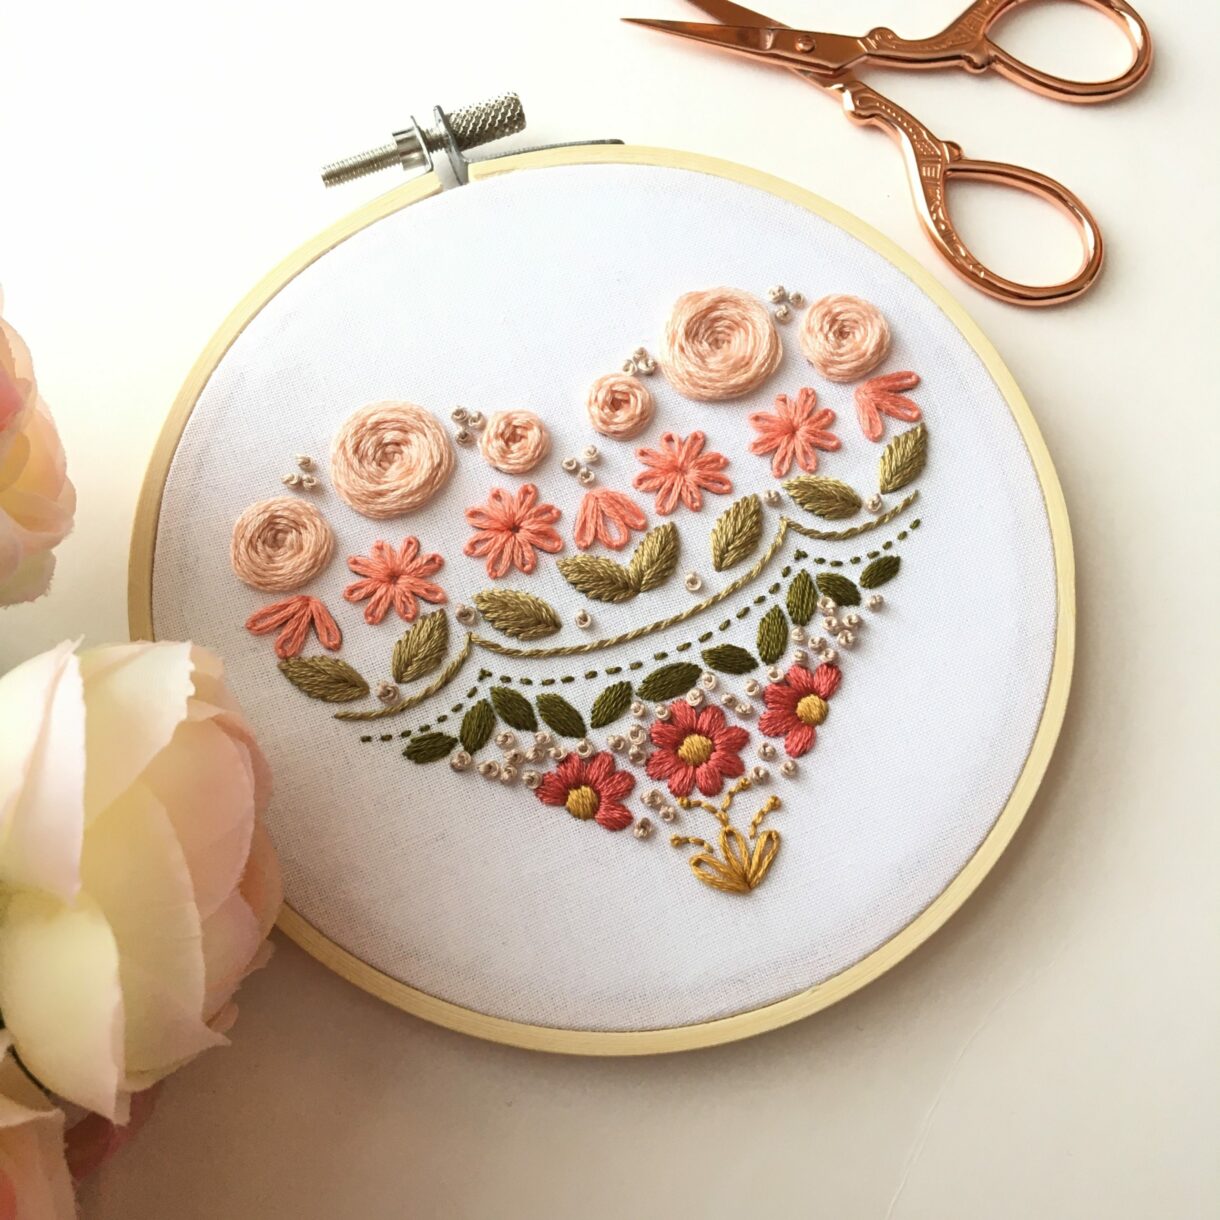 picture of hand stitched embroidery sampler in a heart shape